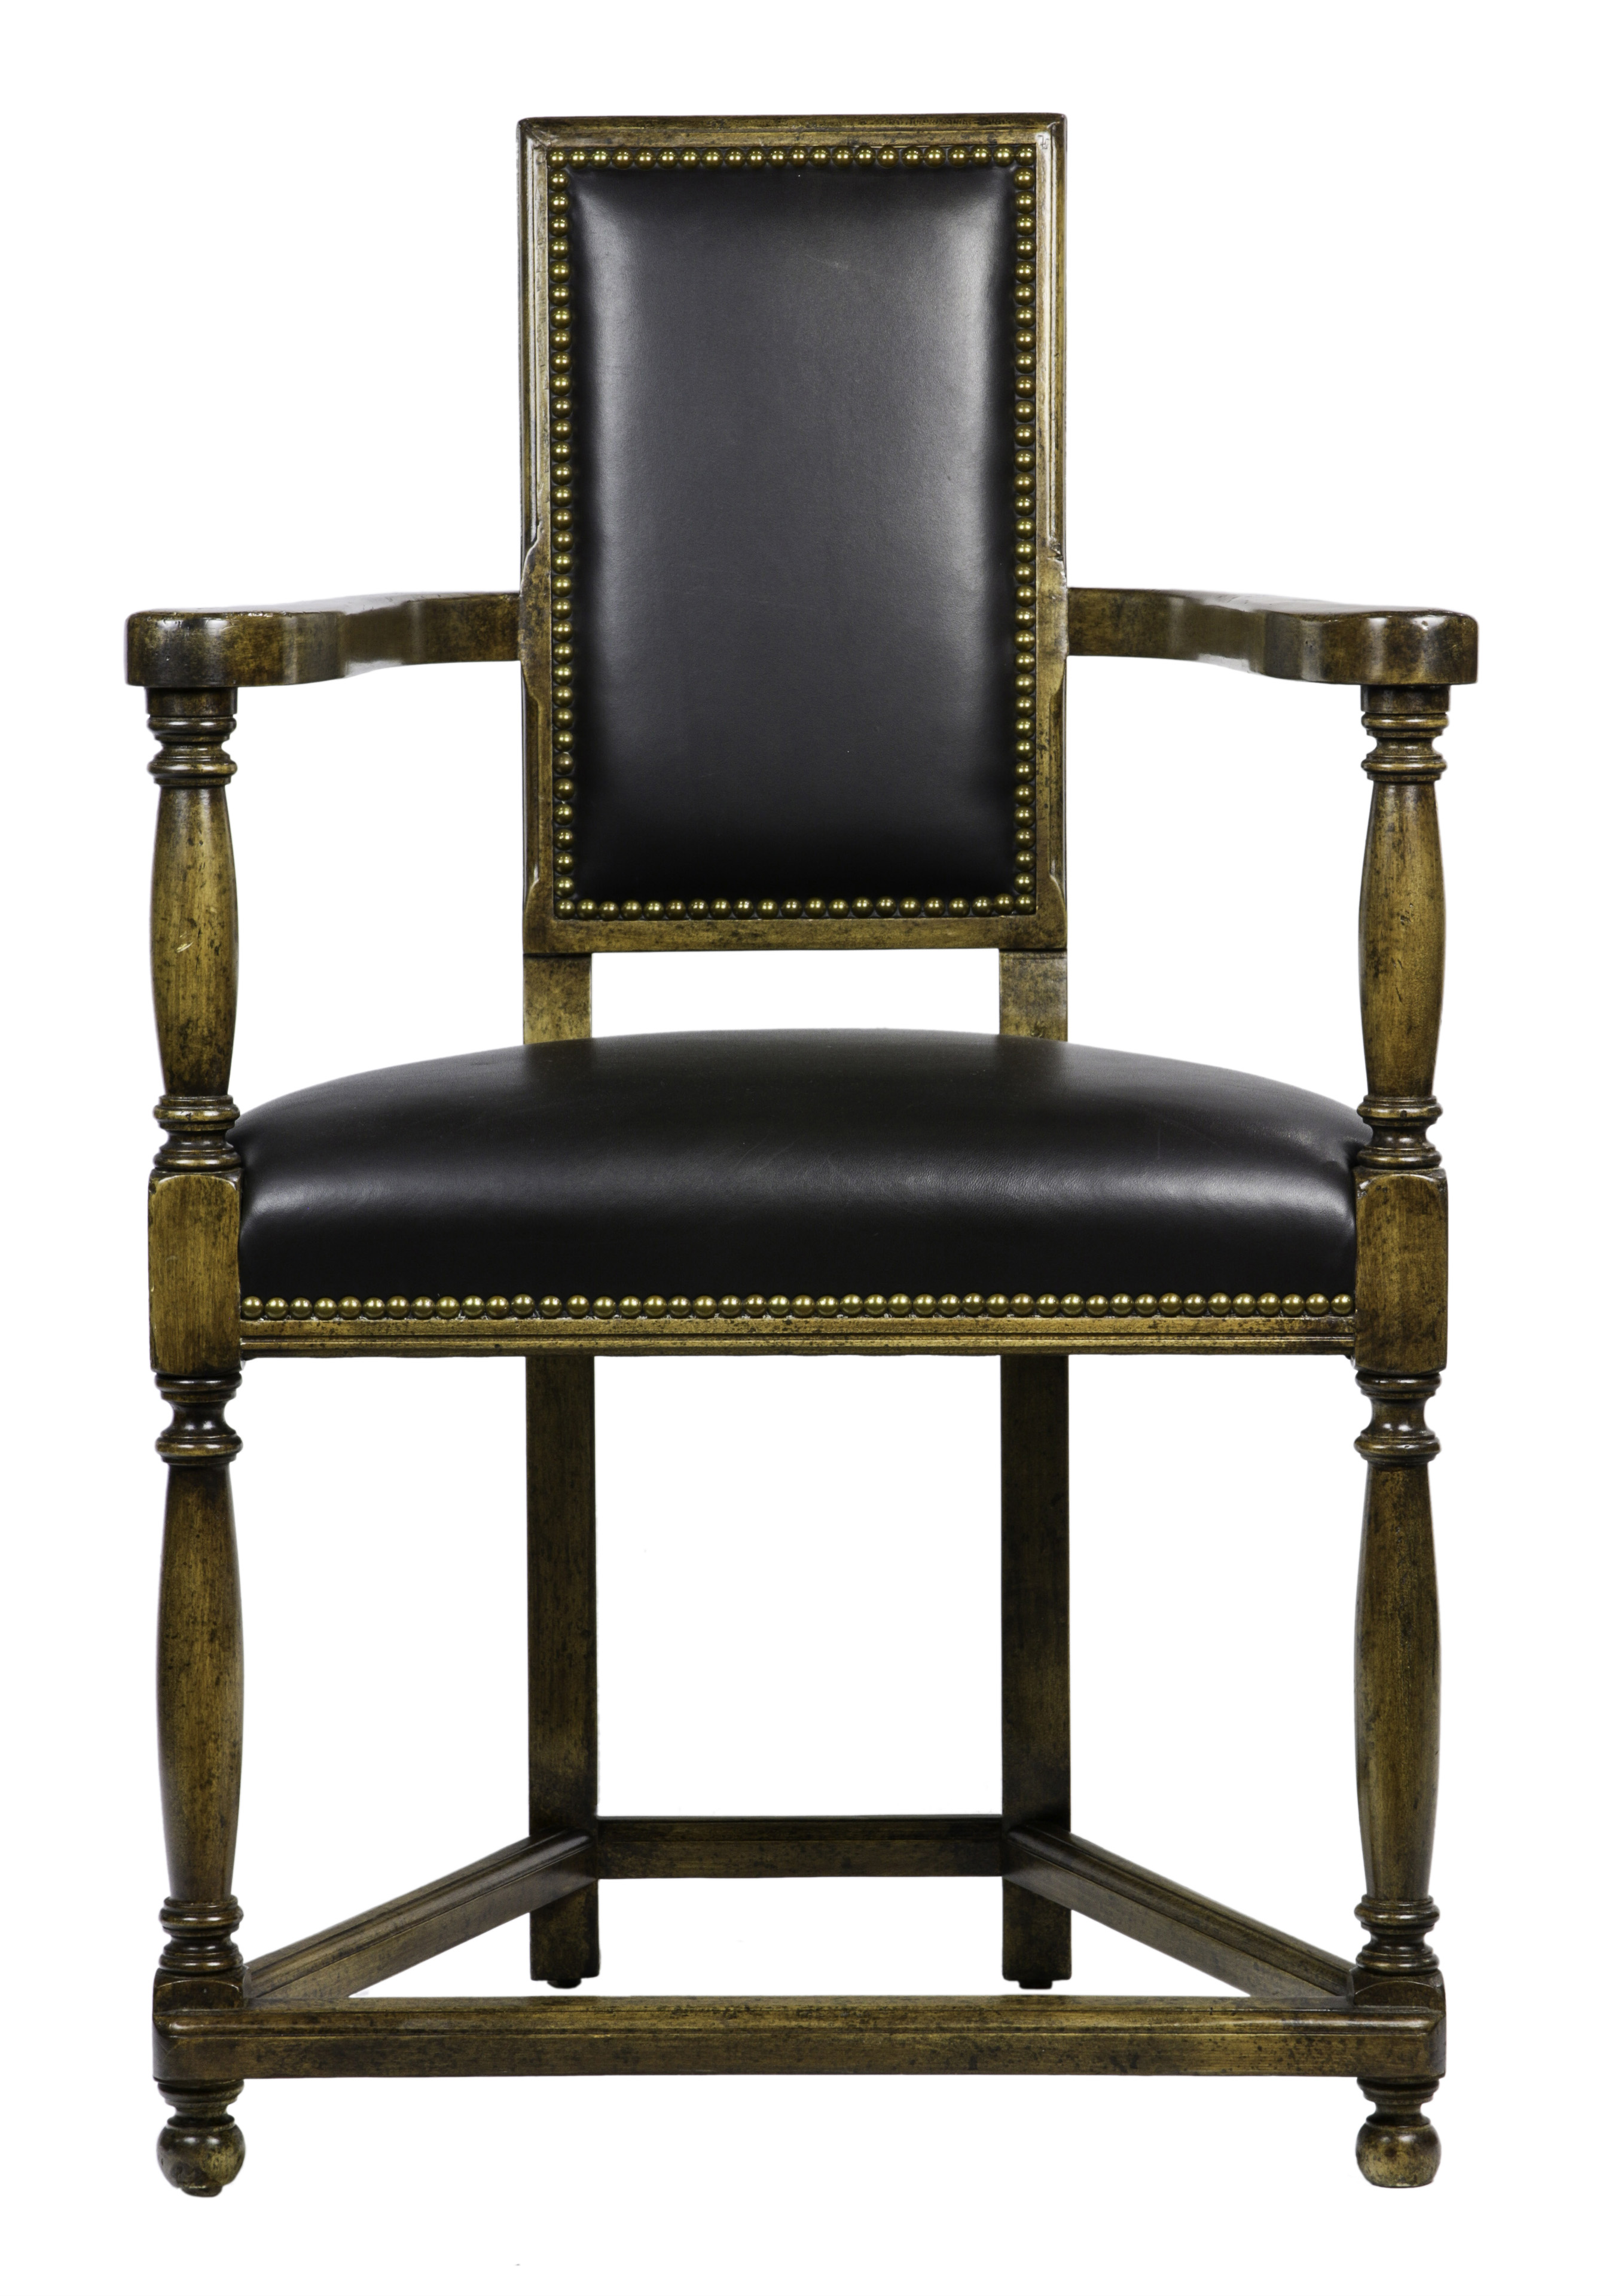 A NEOCLASSICAL STYLE ARMCHAIR A